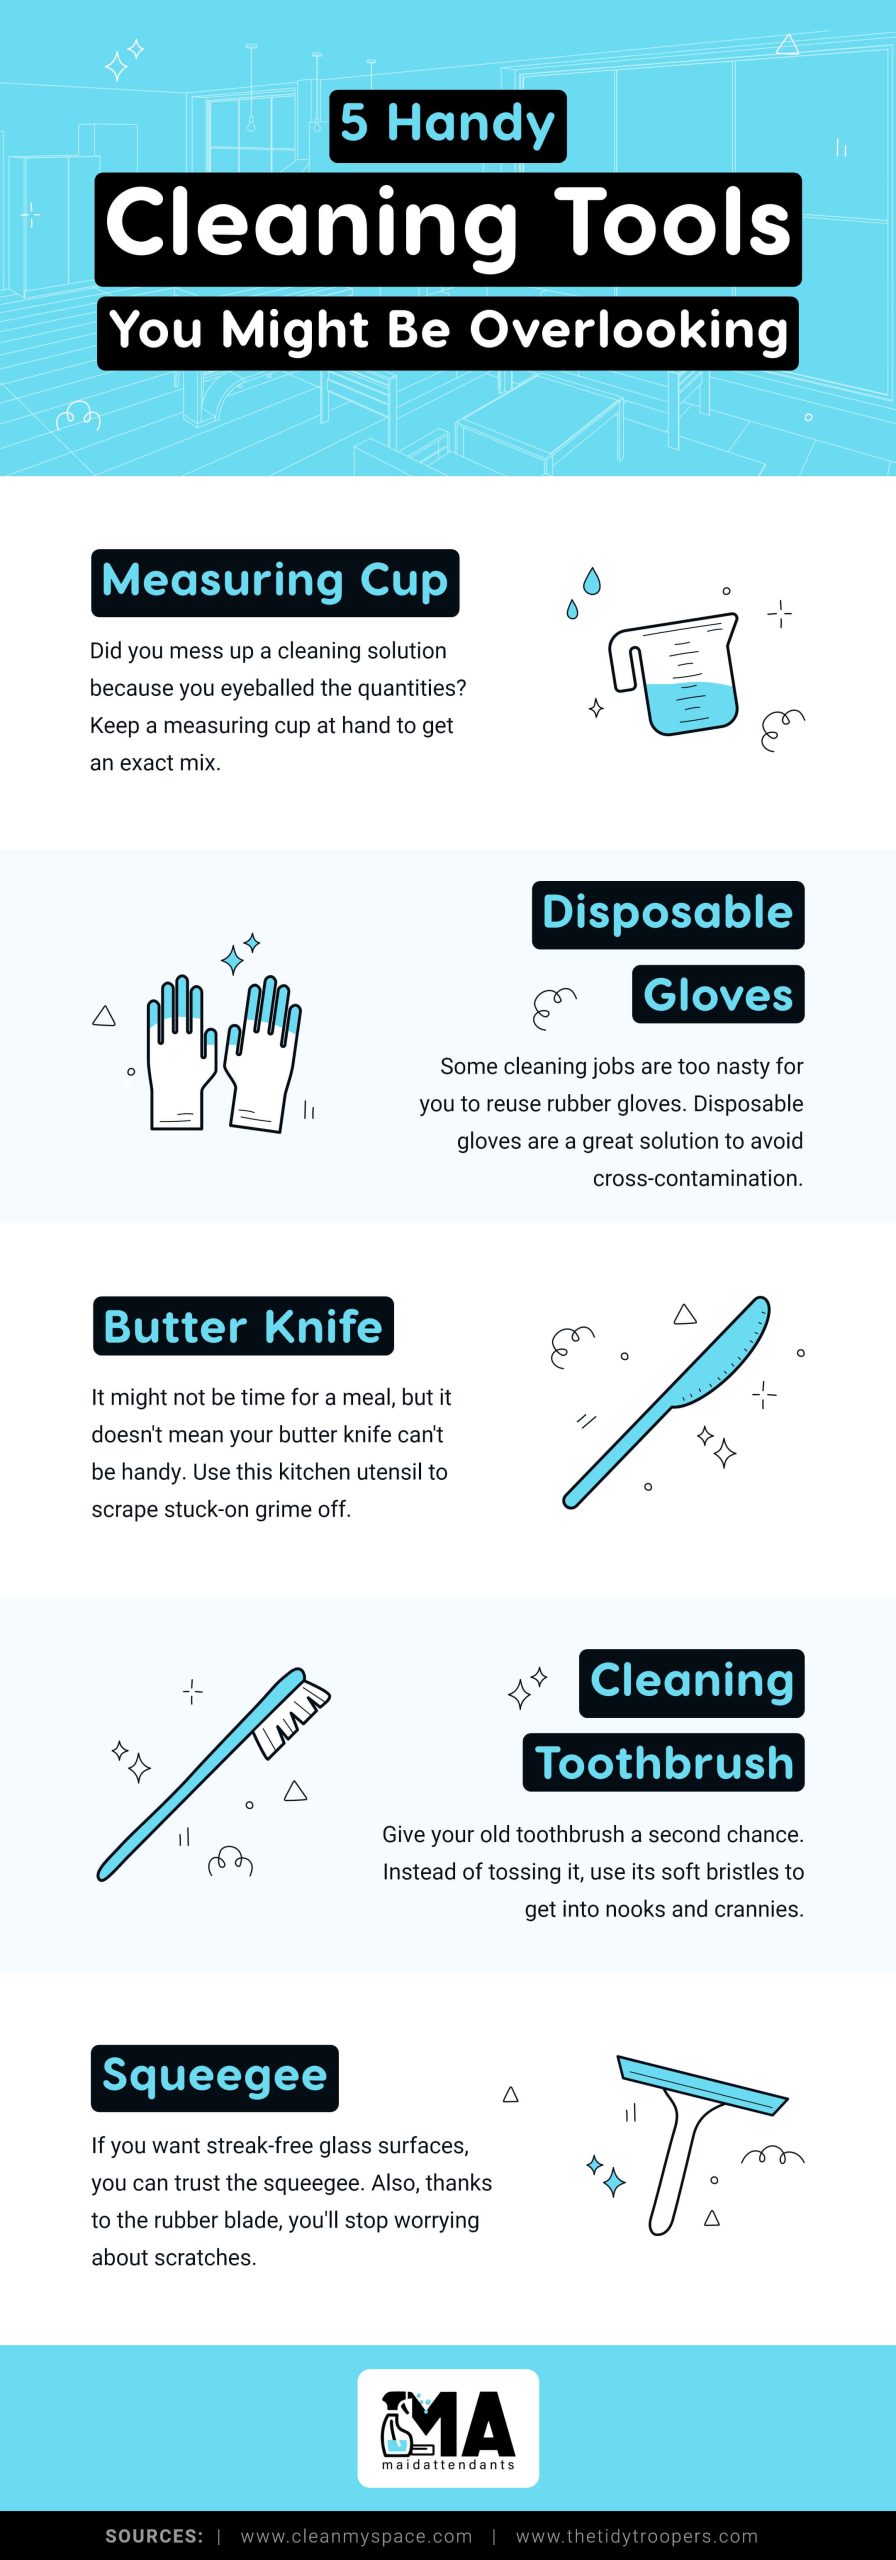 Maidattendants 5 Handy Cleaning Tools You Might Be Overlooking scaled